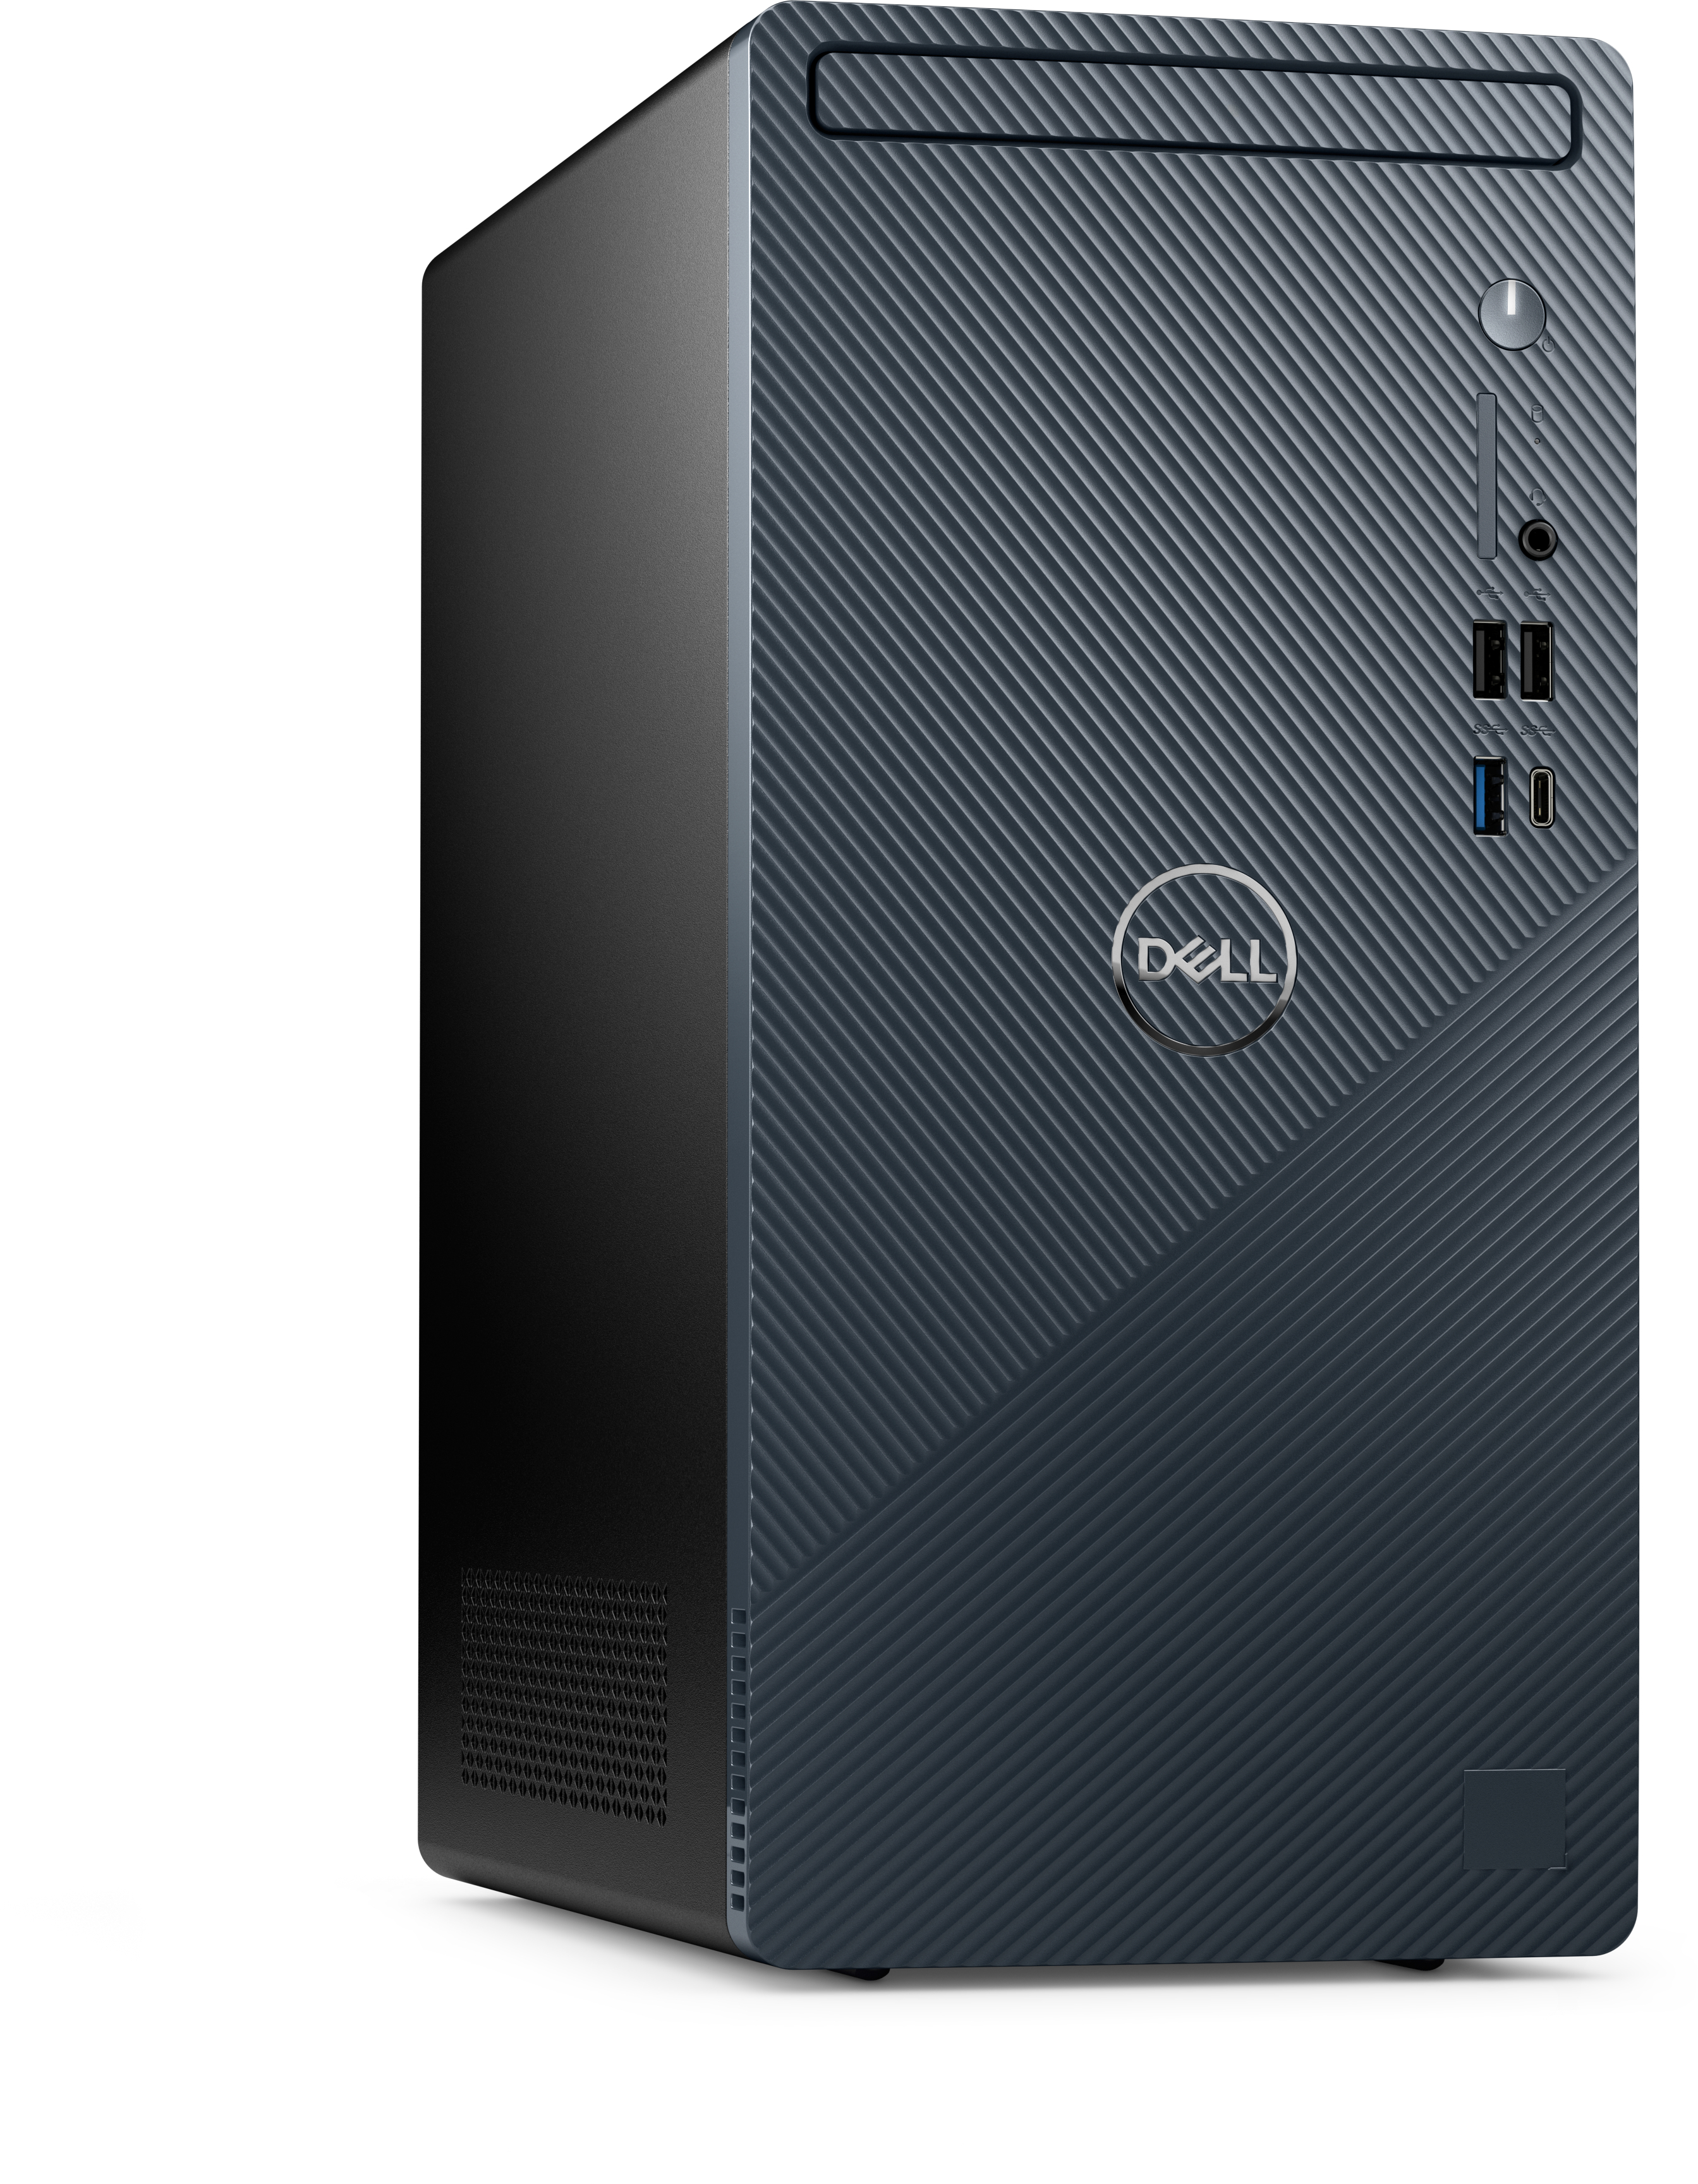 New Inspiron Desktop Intel® Core™ i7 14700 Windows 11 Pro Intel® UHD Graphics 770 16 GB DDR5 512 GB SSD Powered by the latest Intel® Core™ processors, your Inspiron Desktop is designed for productivity with built-in security features.